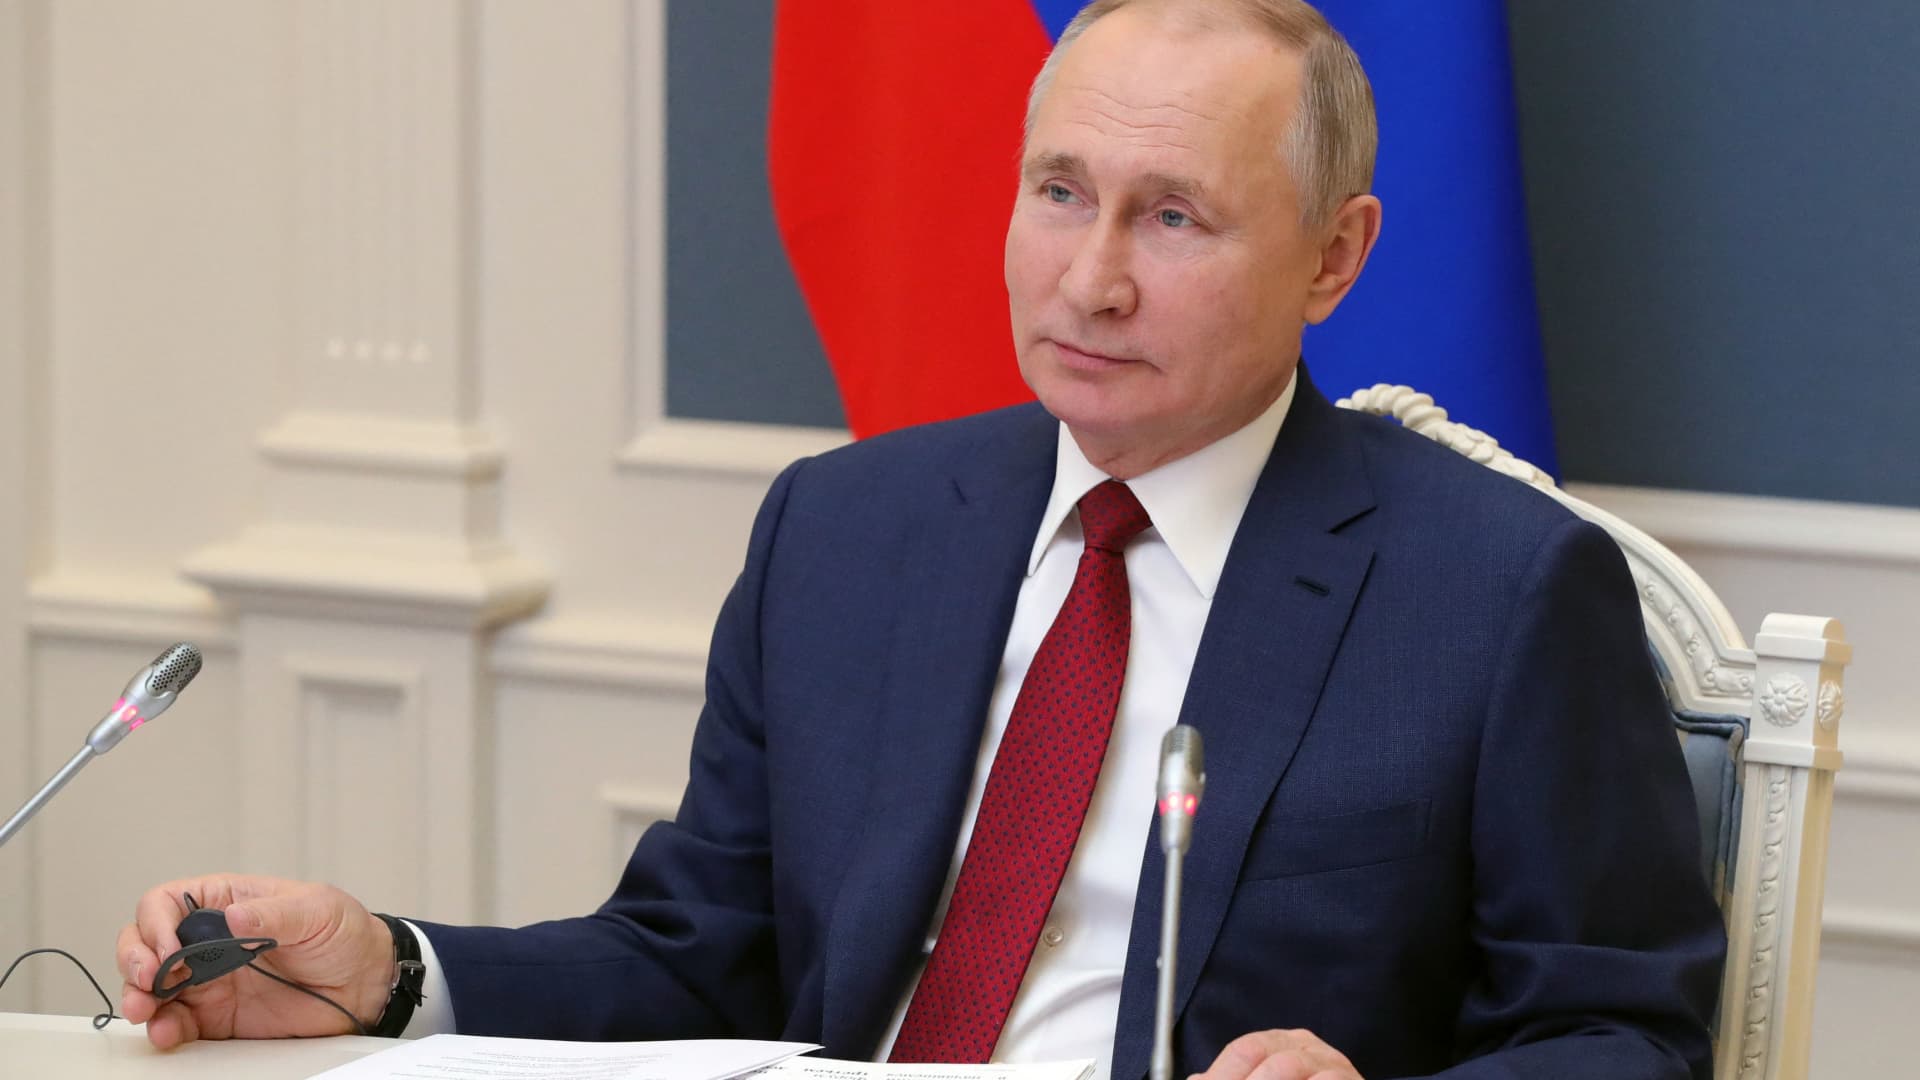 Russian President Vladimir Putin addresses the virtual World Economic Forum via a video link from Moscow on January 27, 2021. (Photo by Mikhail KLIMENTYEV / SPUTNIK / AFP) (Photo by MIKHAIL KLIMENTYEV/SPUTNIK/AFP via Getty Images)